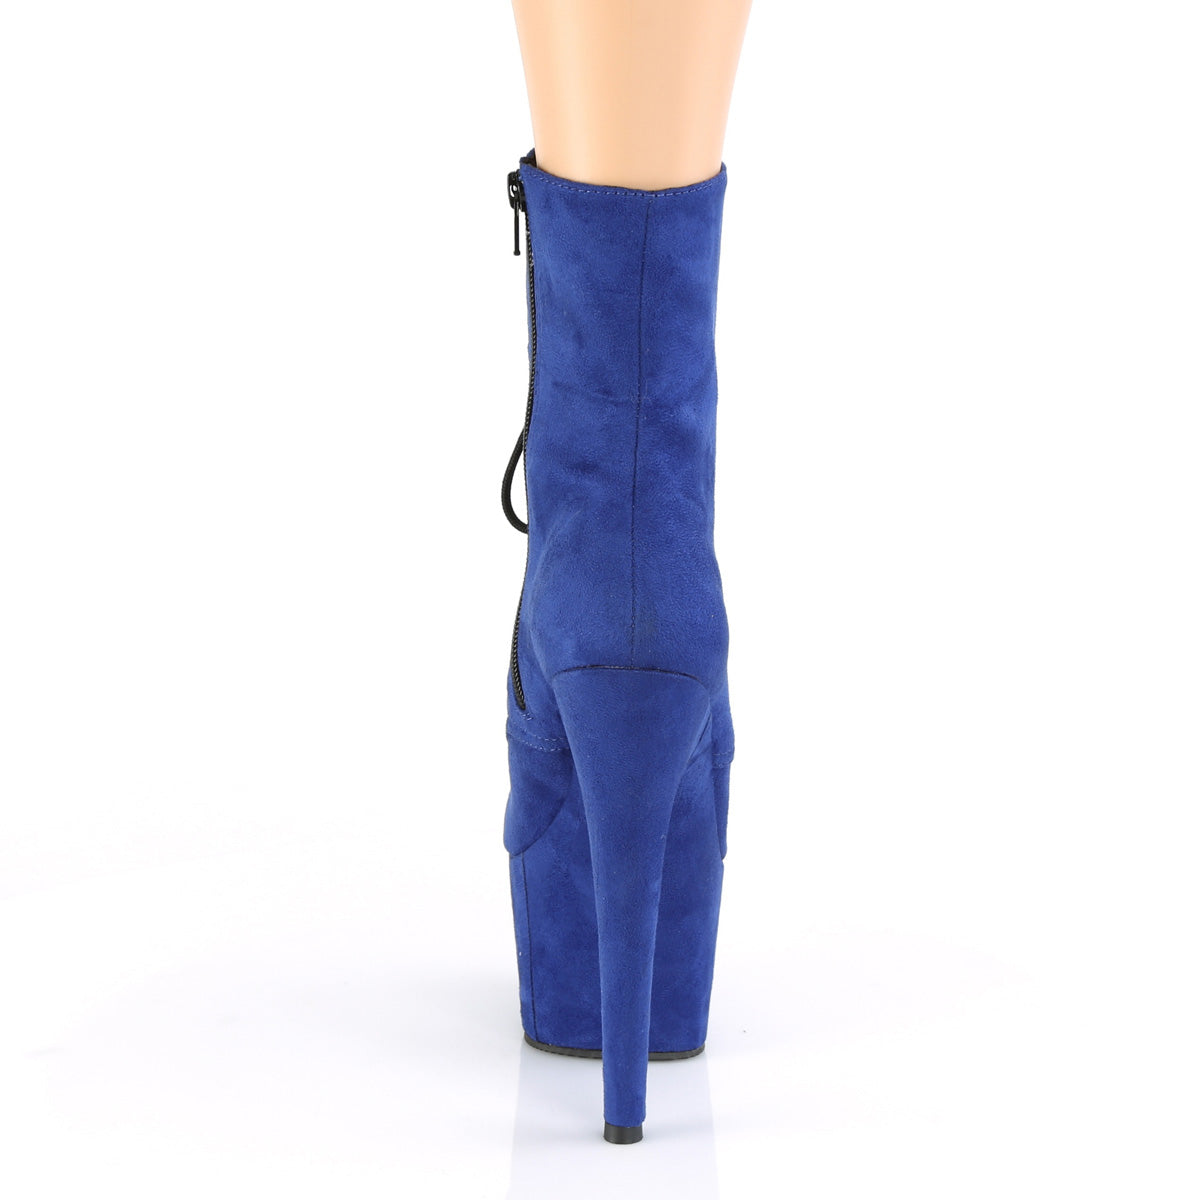 ADORE-1020FS 7" Heel Royal Blue Exotic Dancing Ankle Boots-Pleaser- Sexy Shoes Fetish Footwear